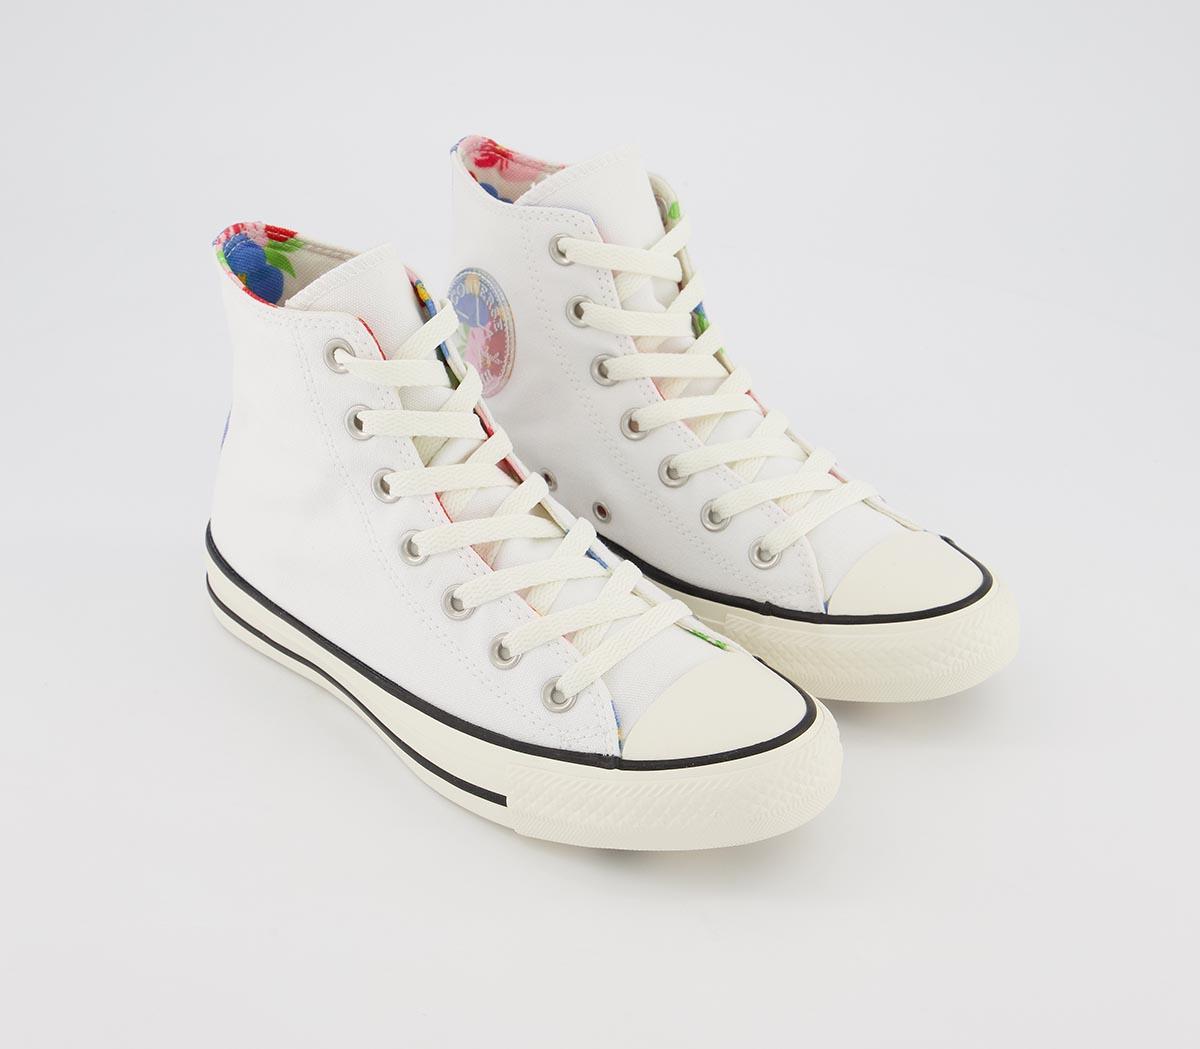 Converse Converse All Star Hi Trainers White Egret Floral Exclusive ...